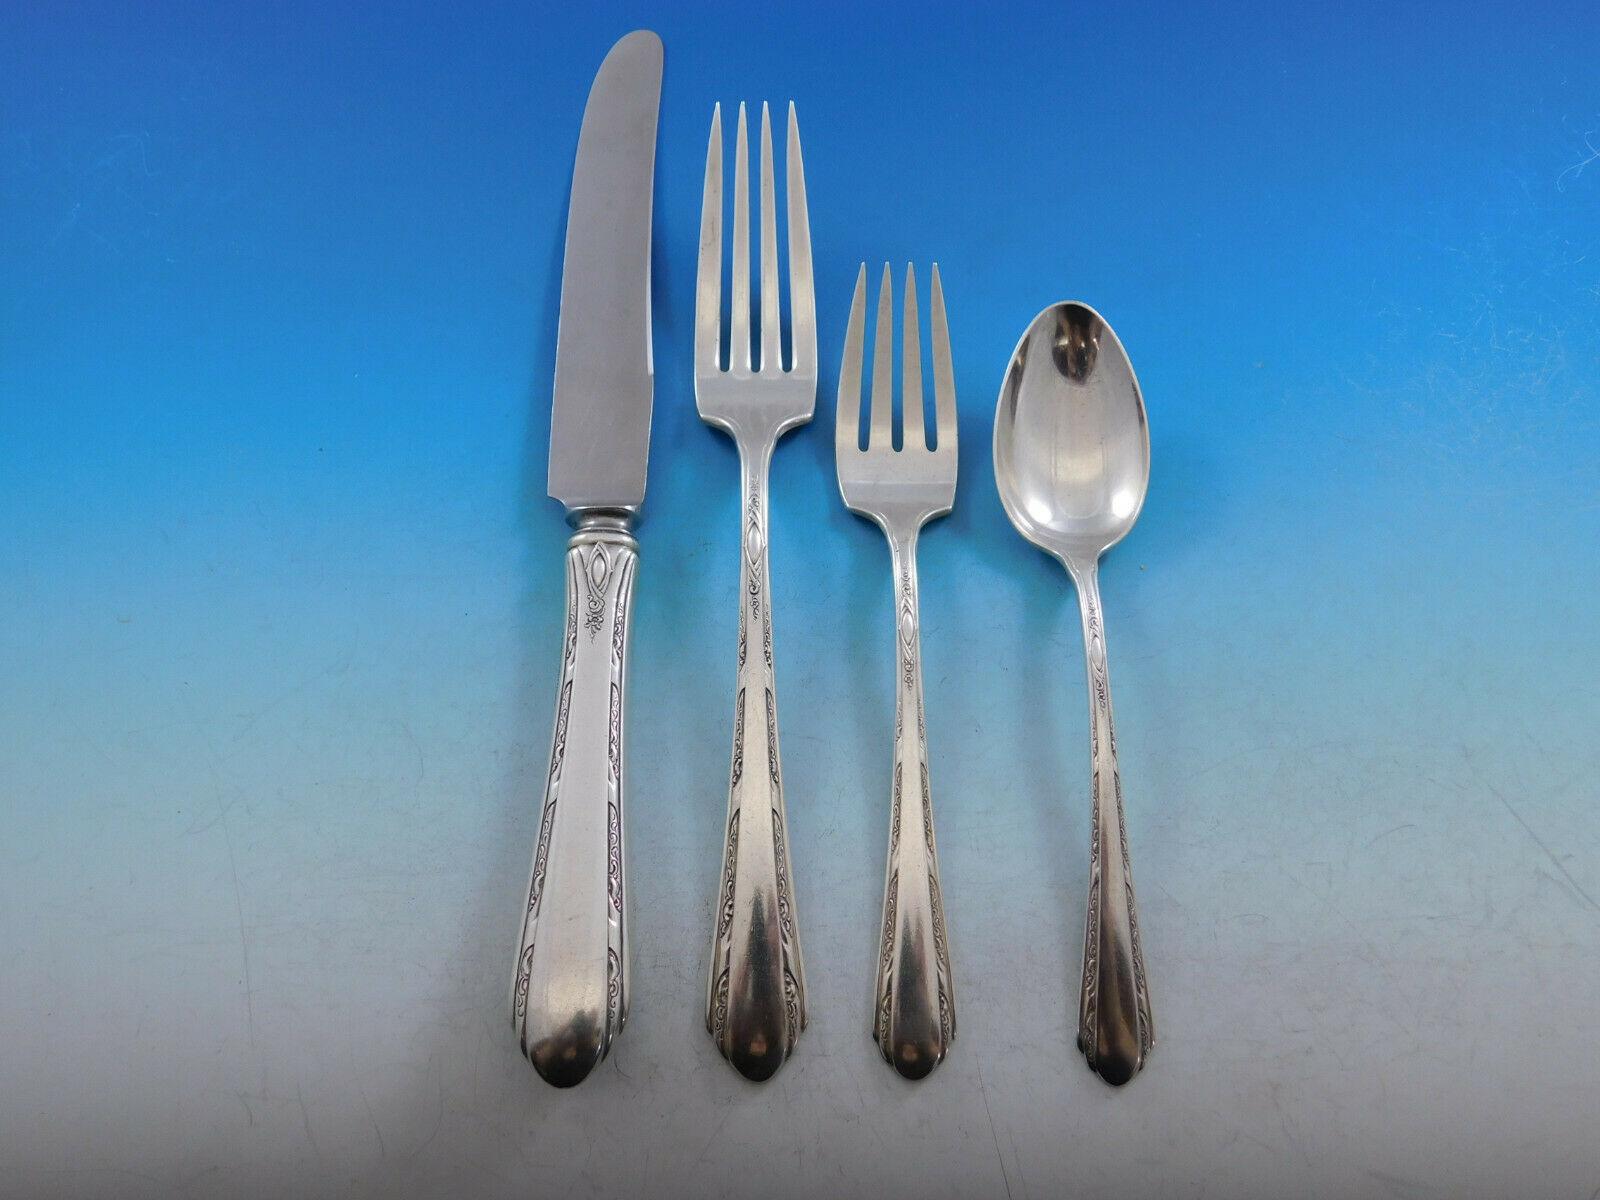 Dinner size chased Diana by Towle circa 1930s sterling silver flatware set, 50 pieces. This set includes:

6 dinner size knives, 9 5/8